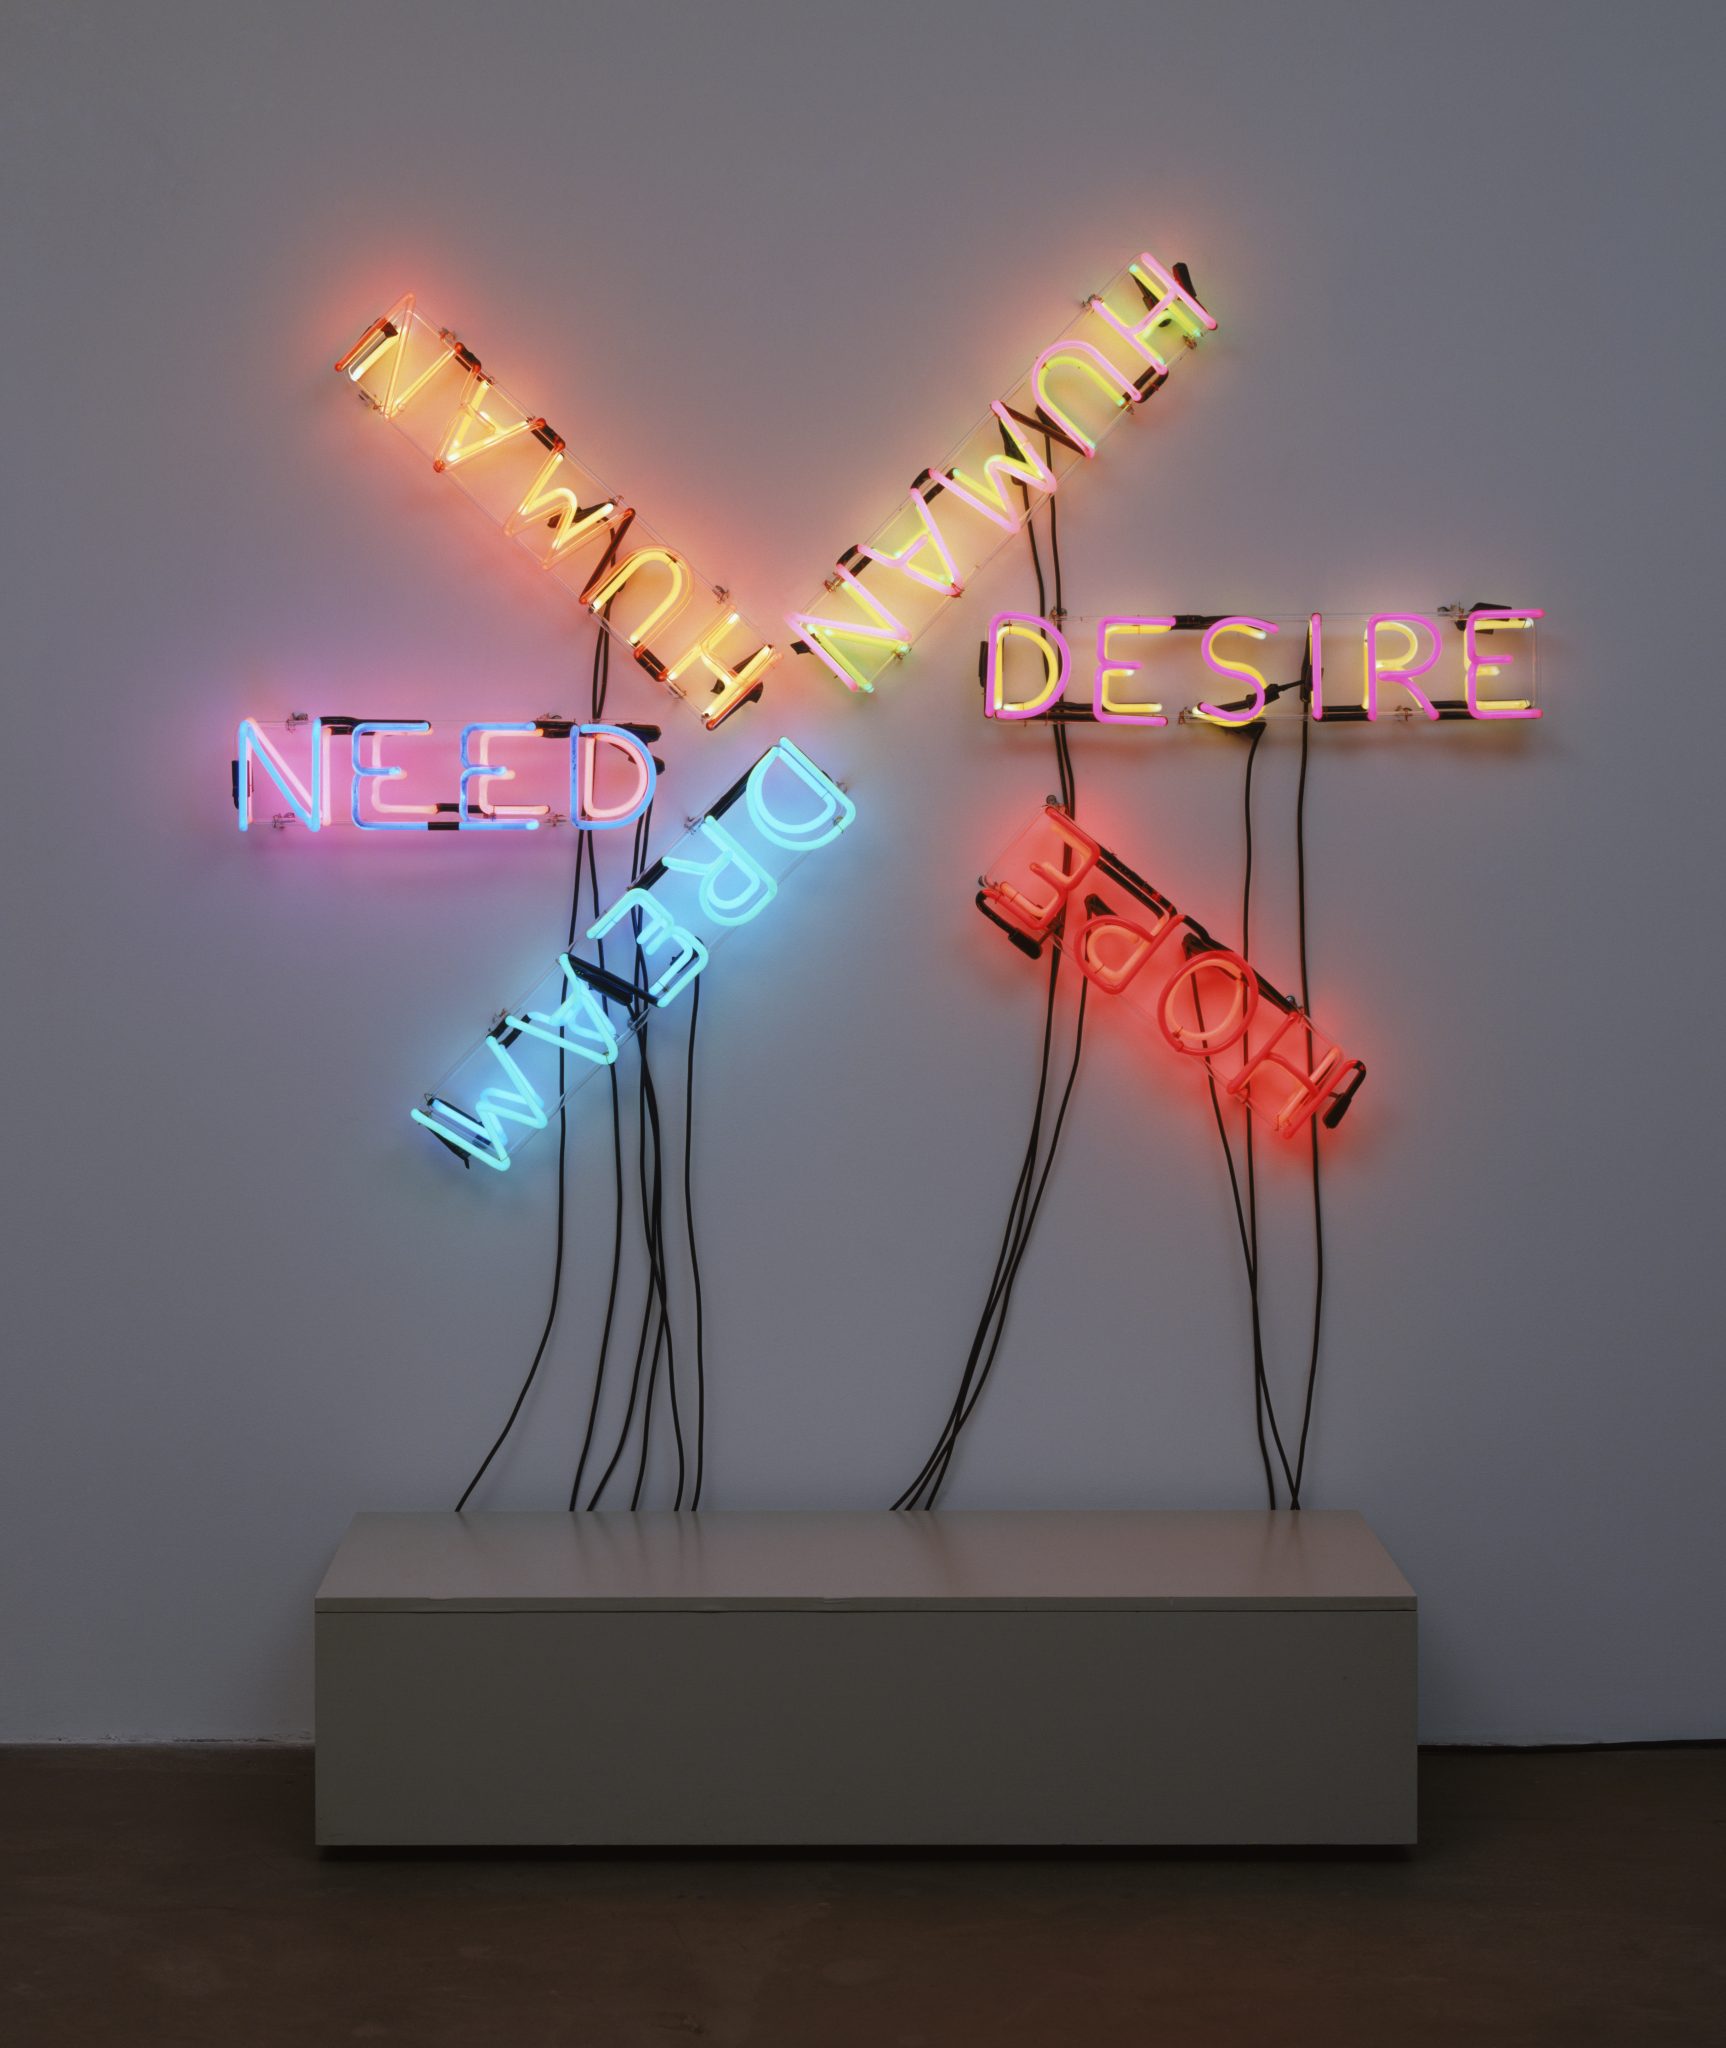 Bruce Nauman (American, born 1941) Human/Need/Desire 1983 Neon tubing and wire with glass tubing suspension frames The Museum of Modern Art, New York. Gift of Emily and Jerry Spiegel, 1991 © 2017 Bruce Nauman/Artists Rights Society (ARS), New York FAD magazine